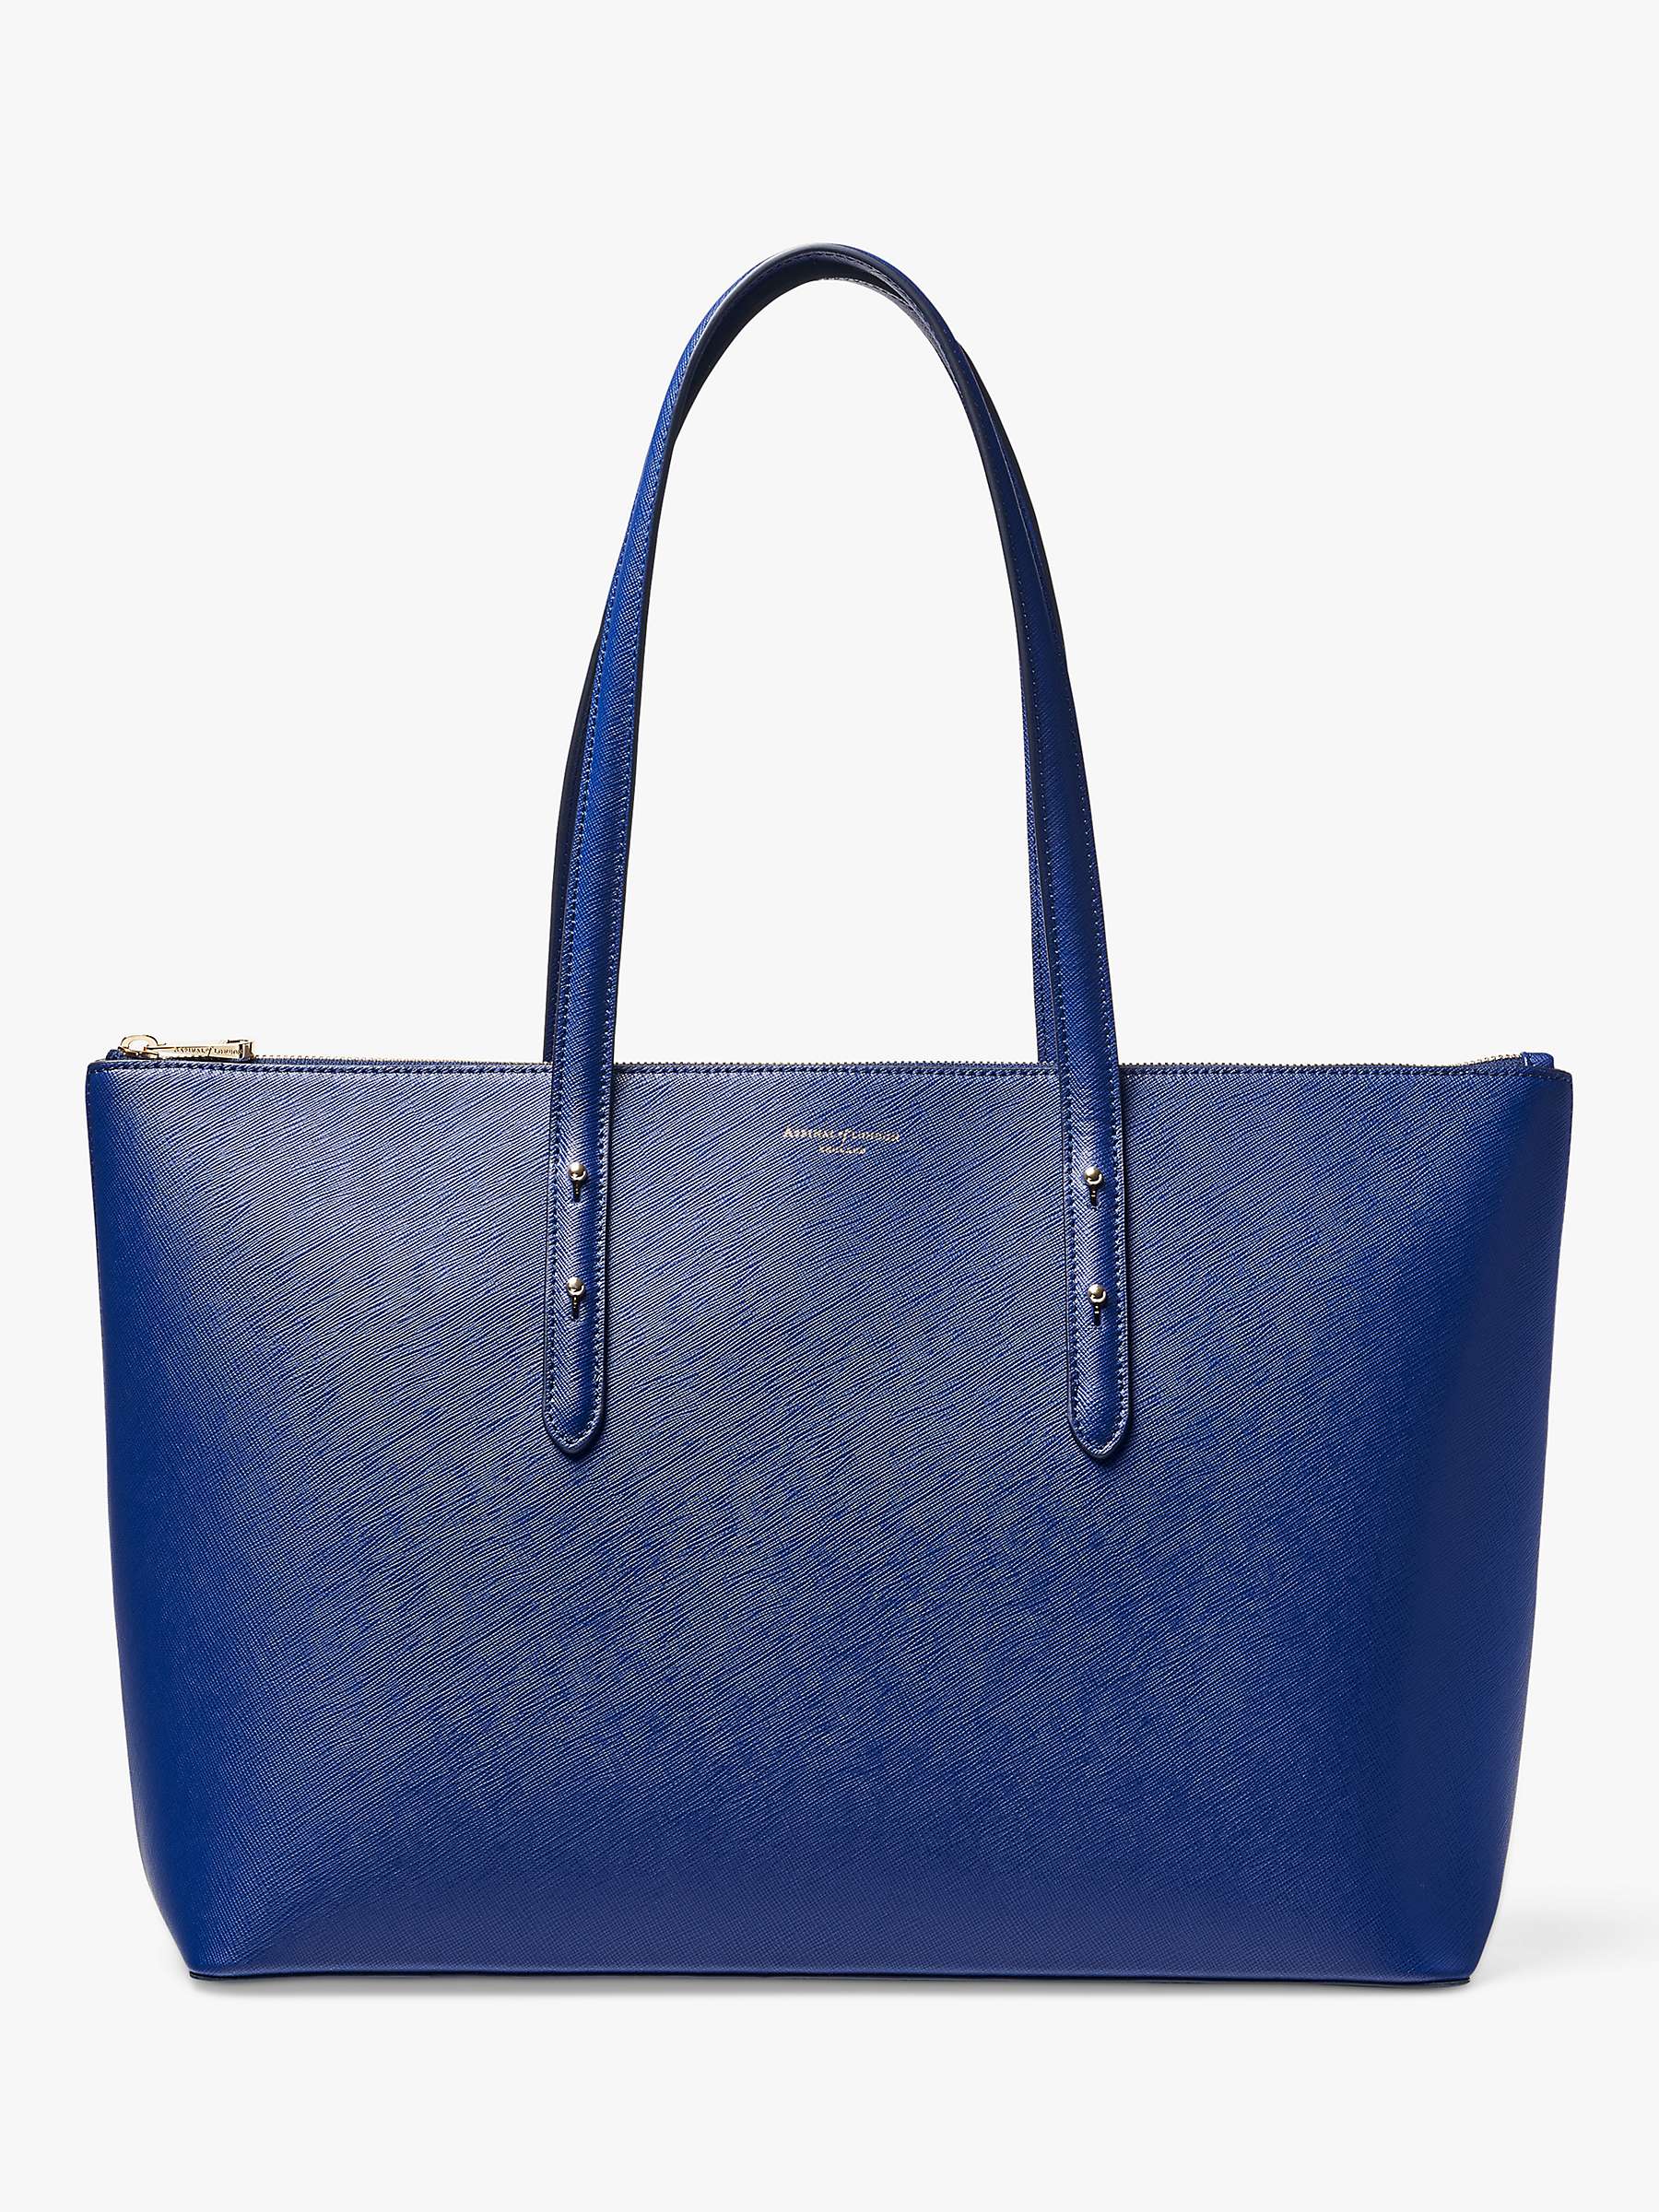 Buy Aspinal of London Regent Saffiano Leather Zip-Top Tote Bag Online at johnlewis.com